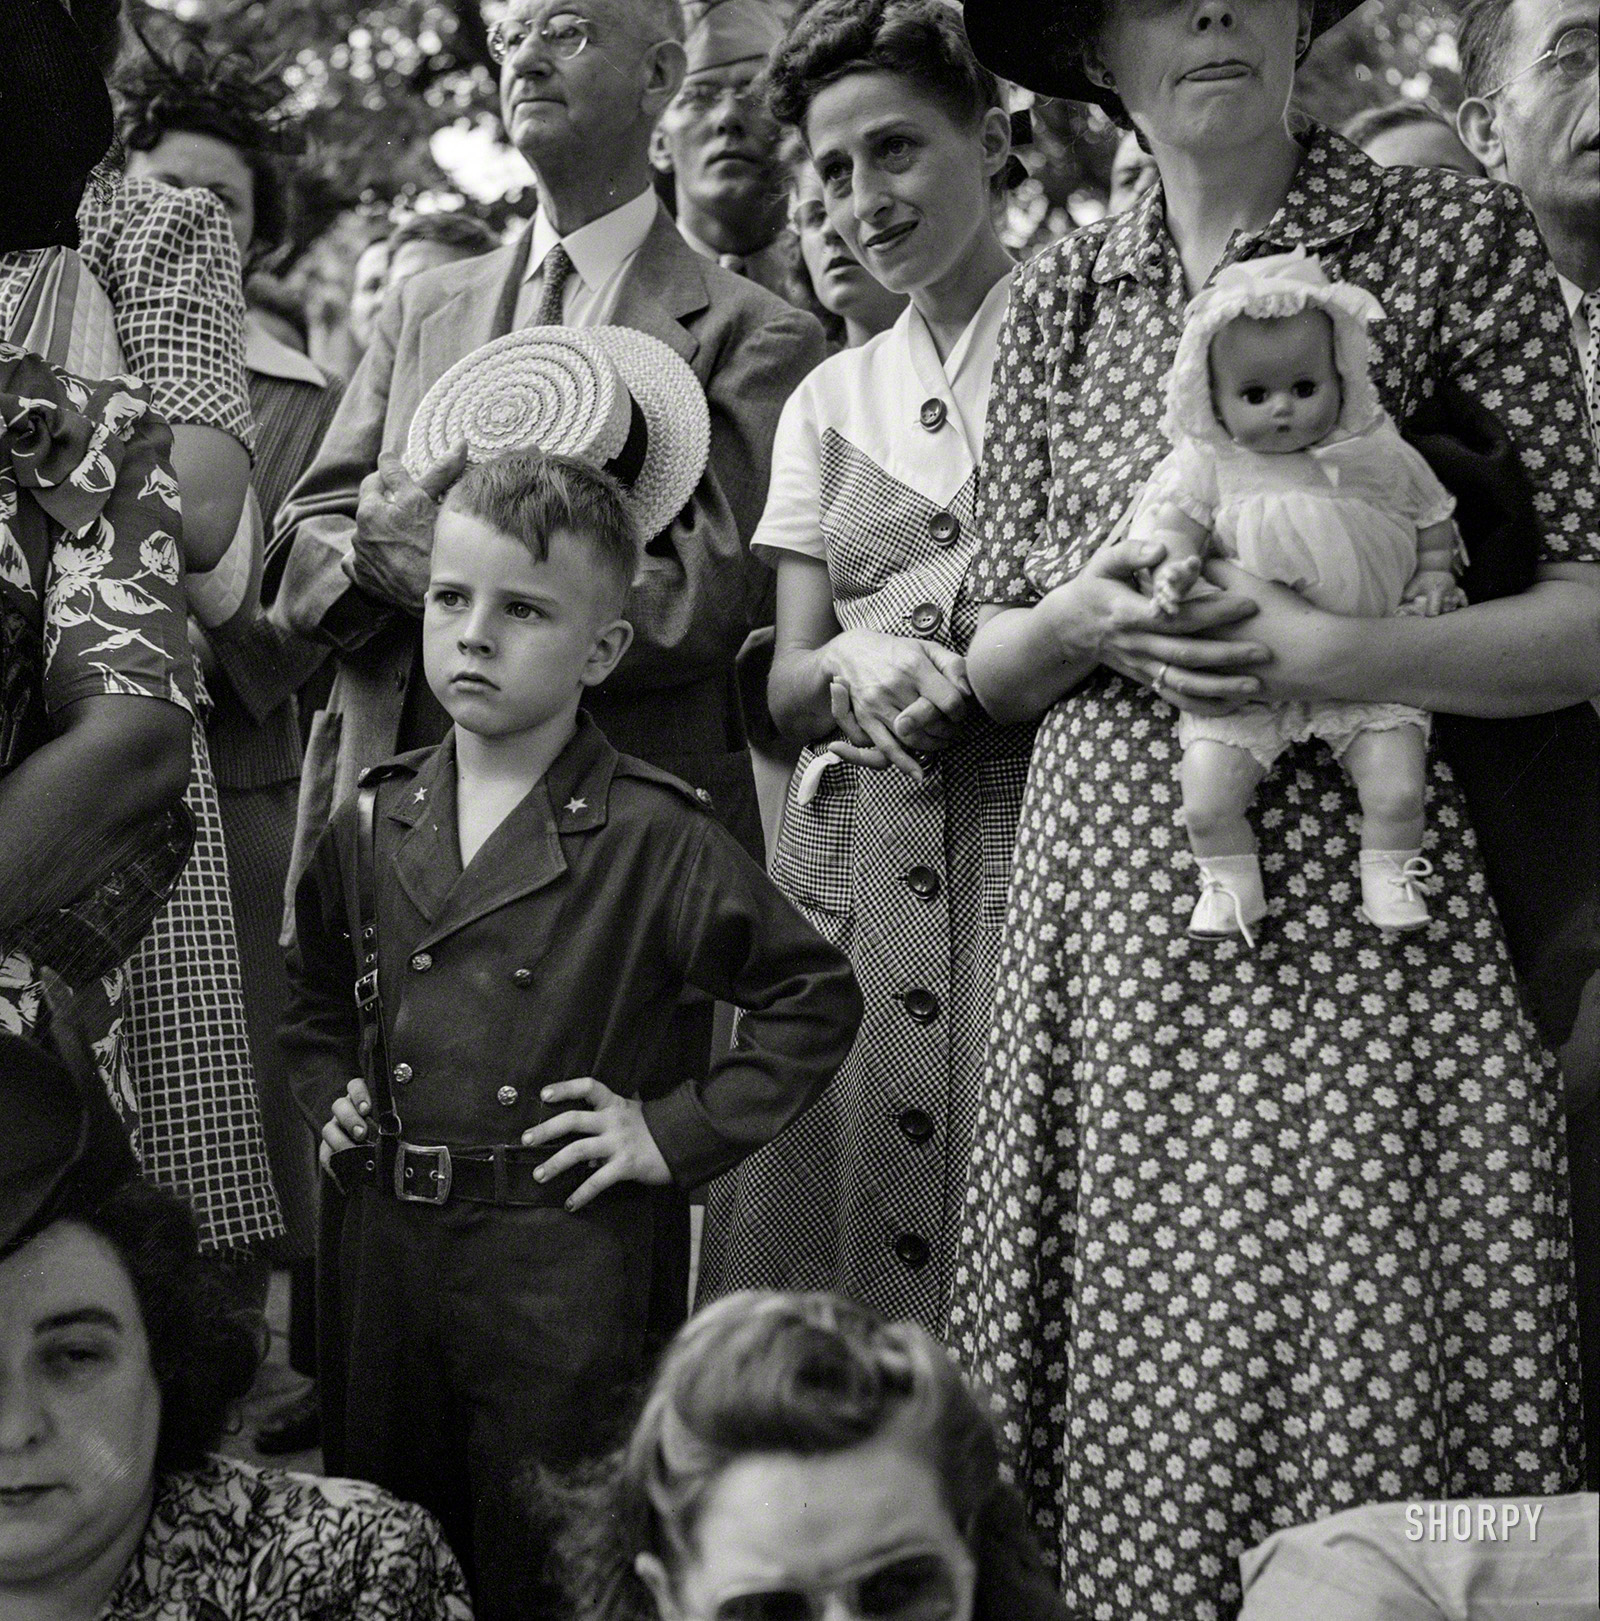 July 1943. Washington, D.C. "Spectators at Office of Civilian Defense parade to recruit civilian defense volunteers." Medium format negative by Esther Bubley for the Office of War Information. View full size.